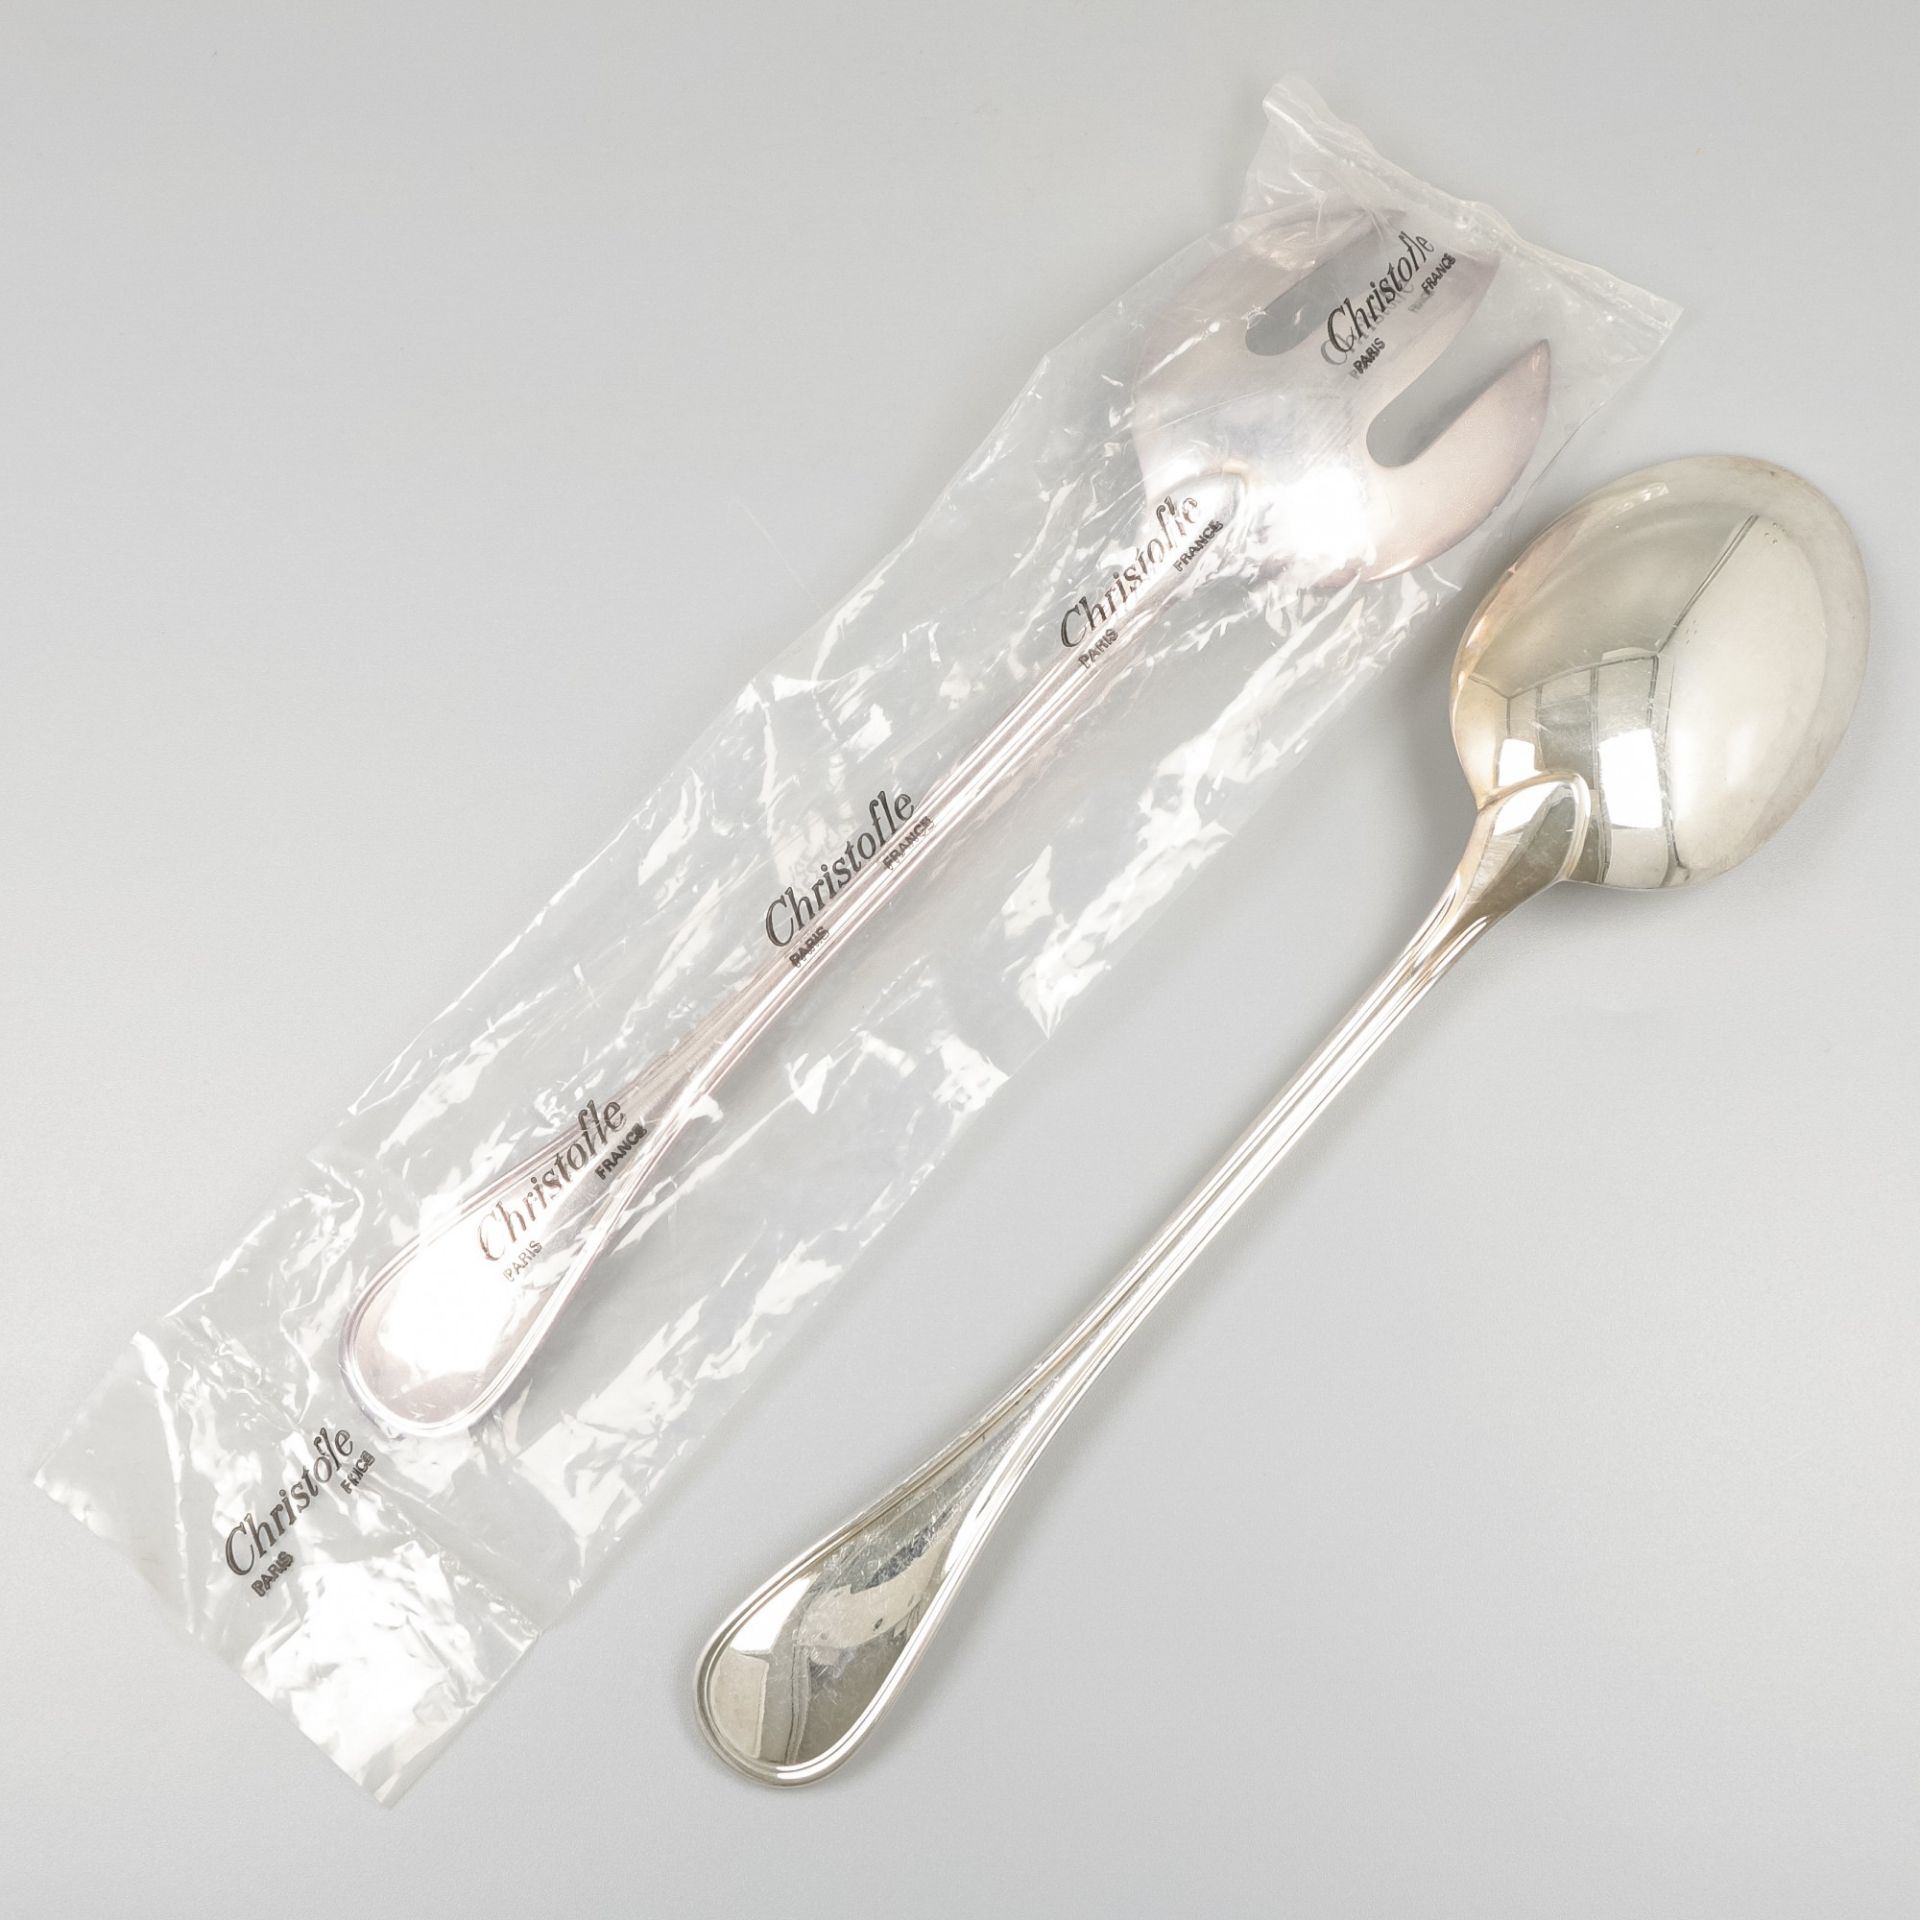 Christofle 2-piece salad serving cutlery, model Albi, silver-plated. - Image 2 of 6